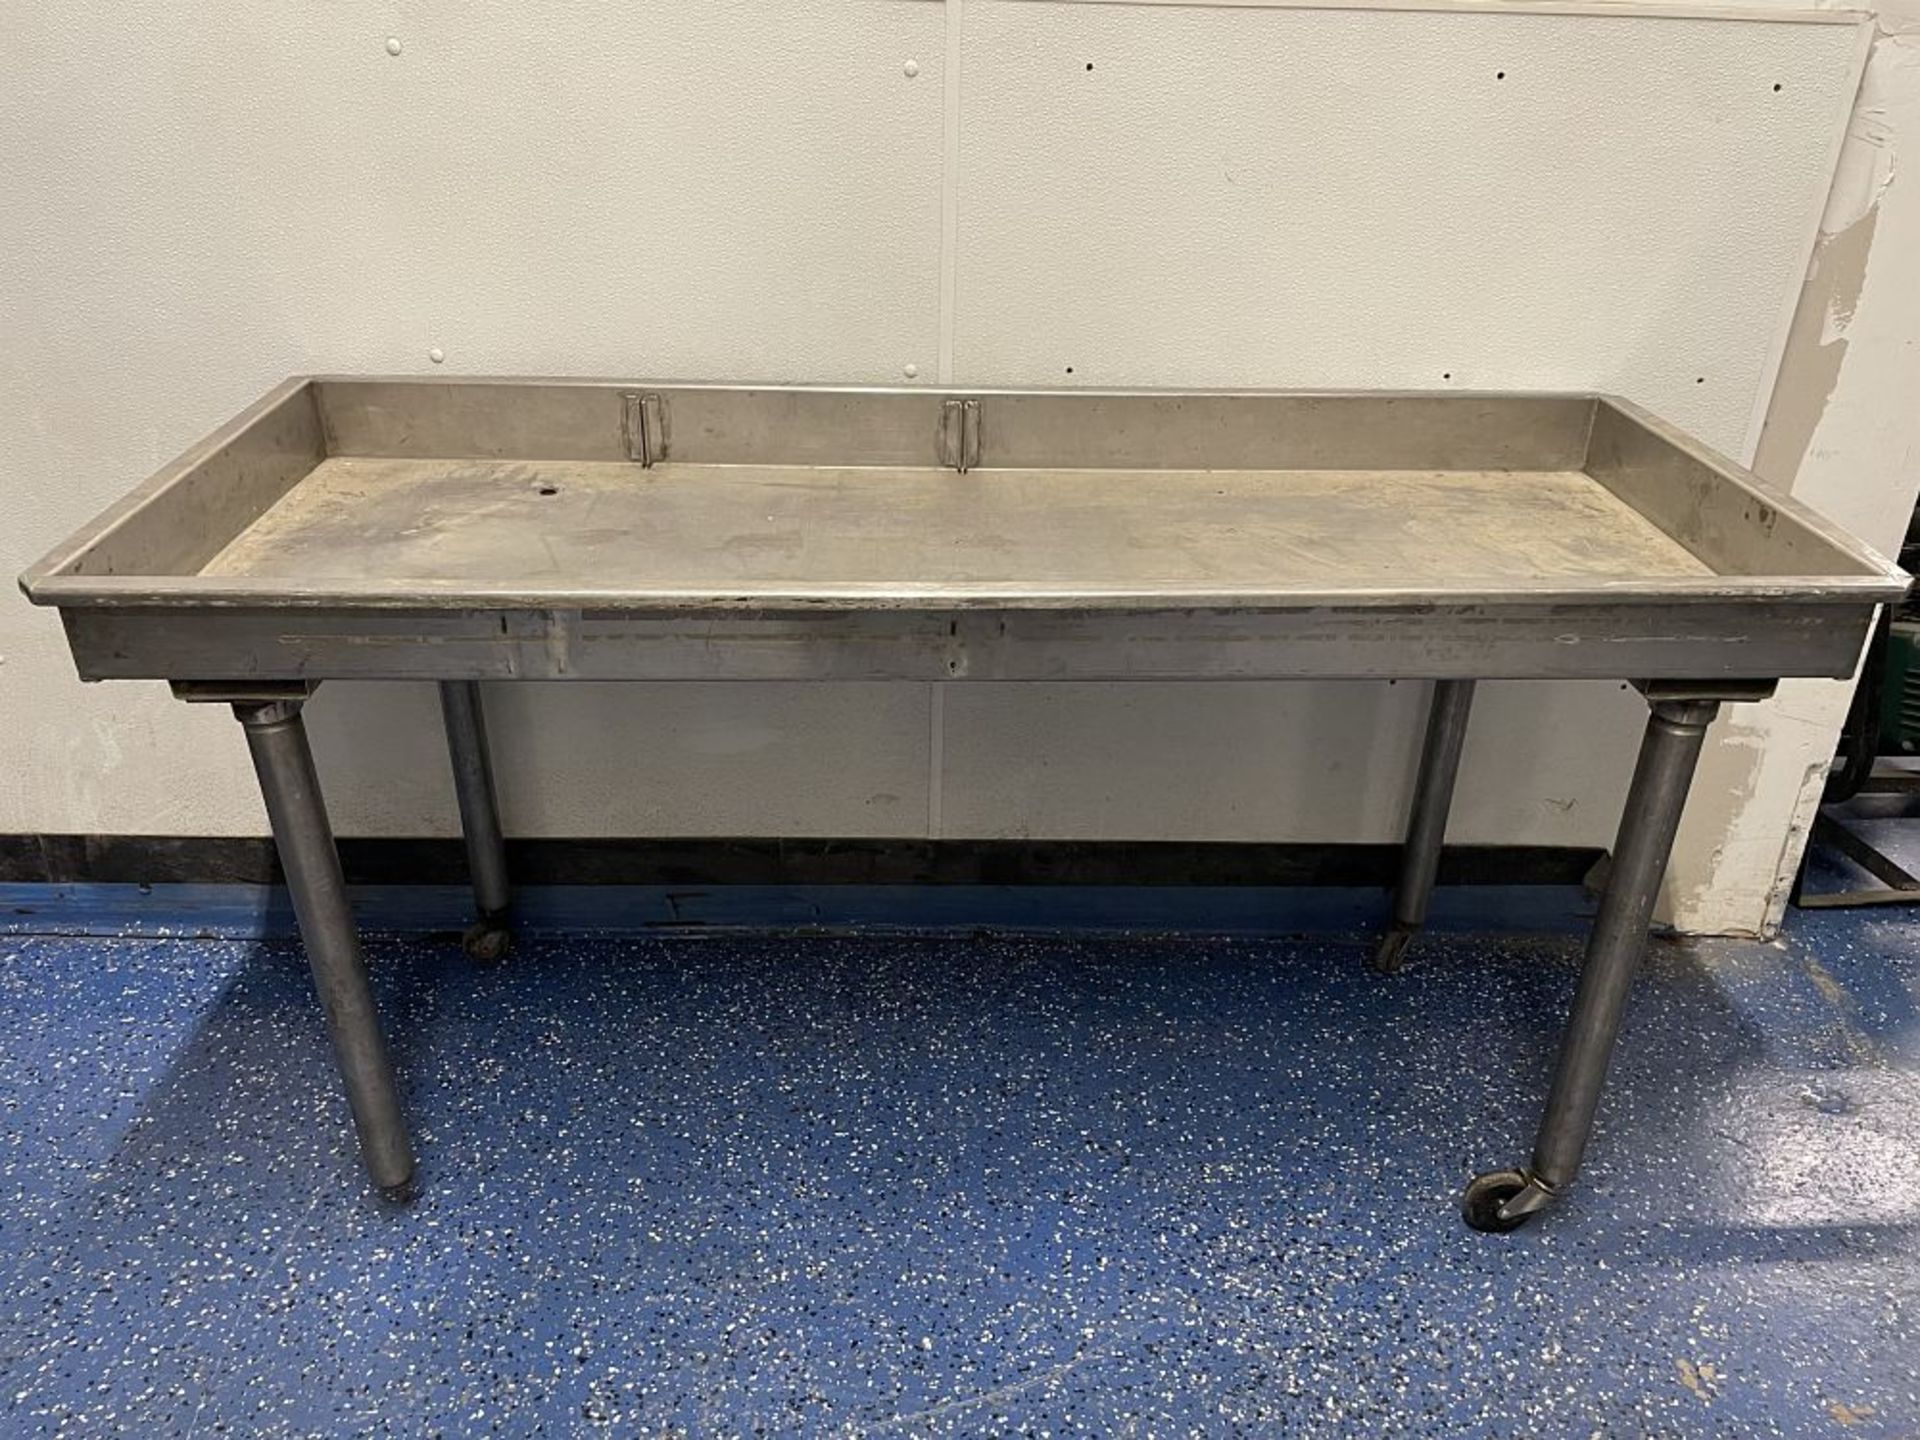 STAINLESS STEEL WORK TABLE